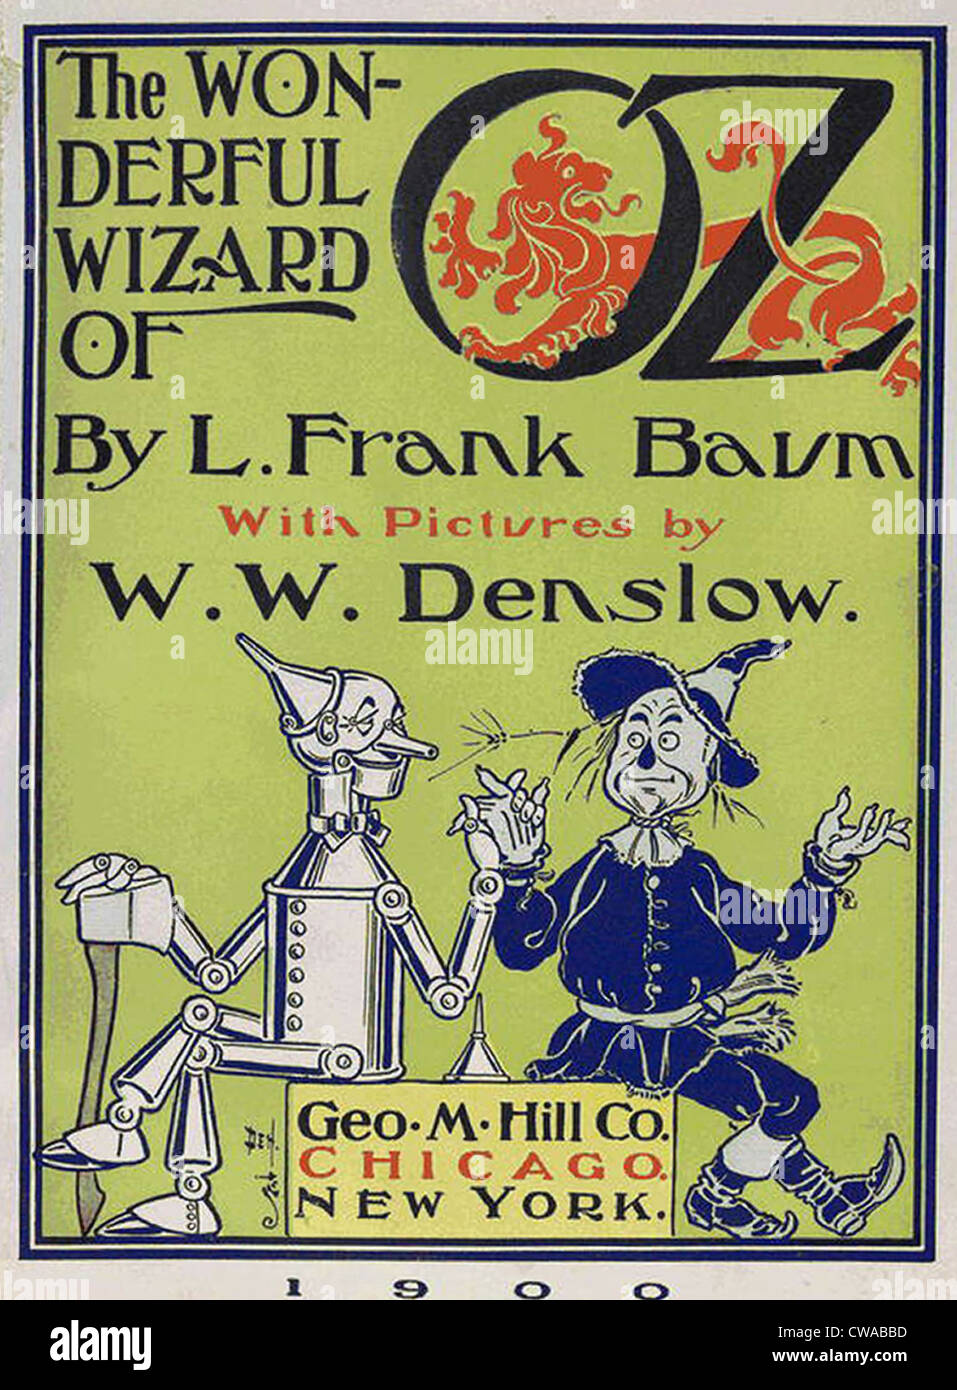 Wonderful Wizard of Oz, title page of first edition written by Frank Lyman Baum in 1900. Stock Photo